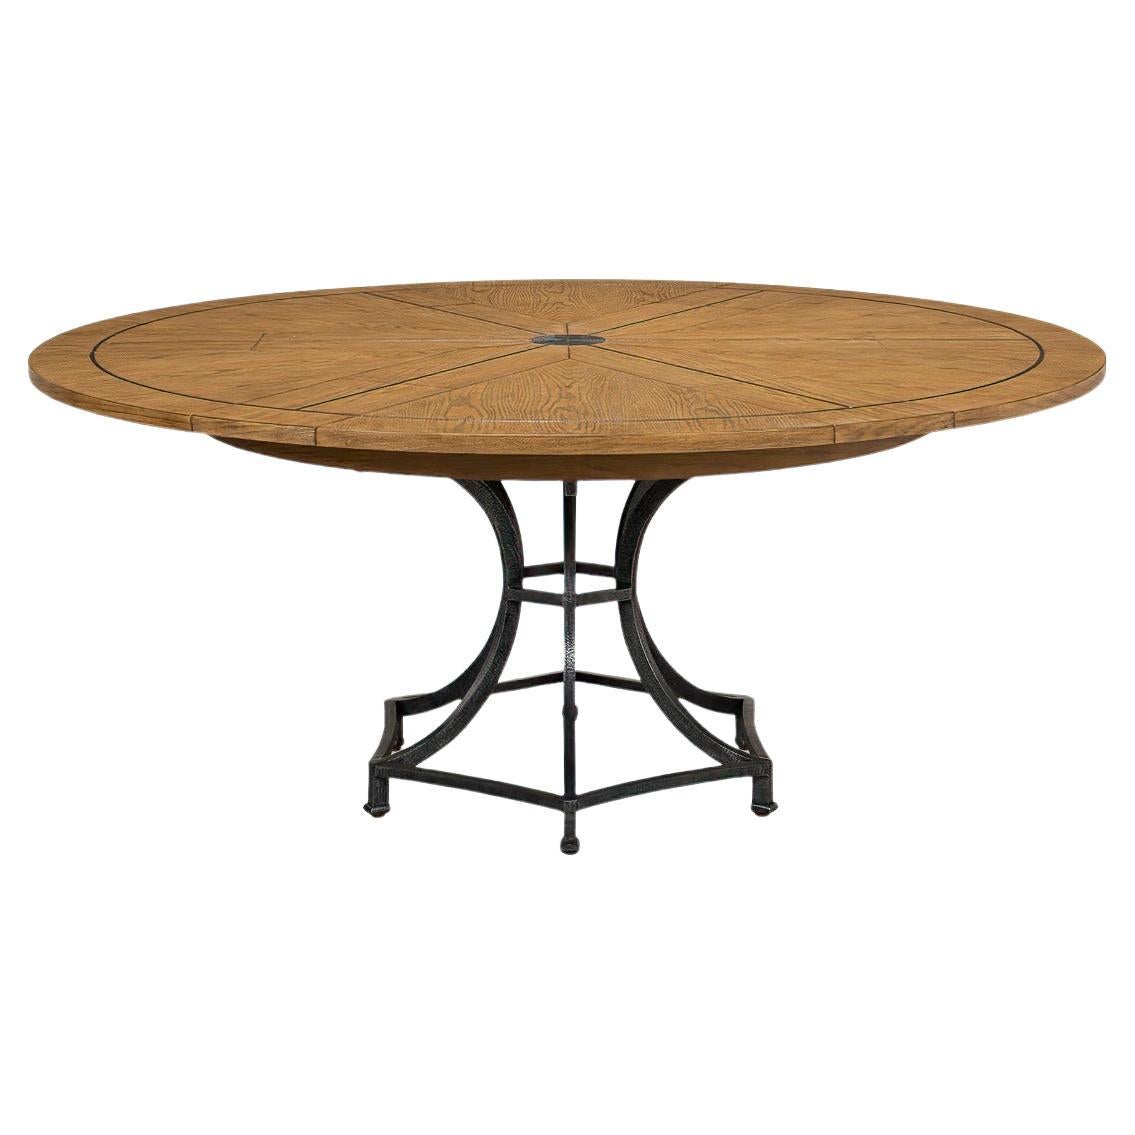 Modern Industrial Dining Table Thick Legs